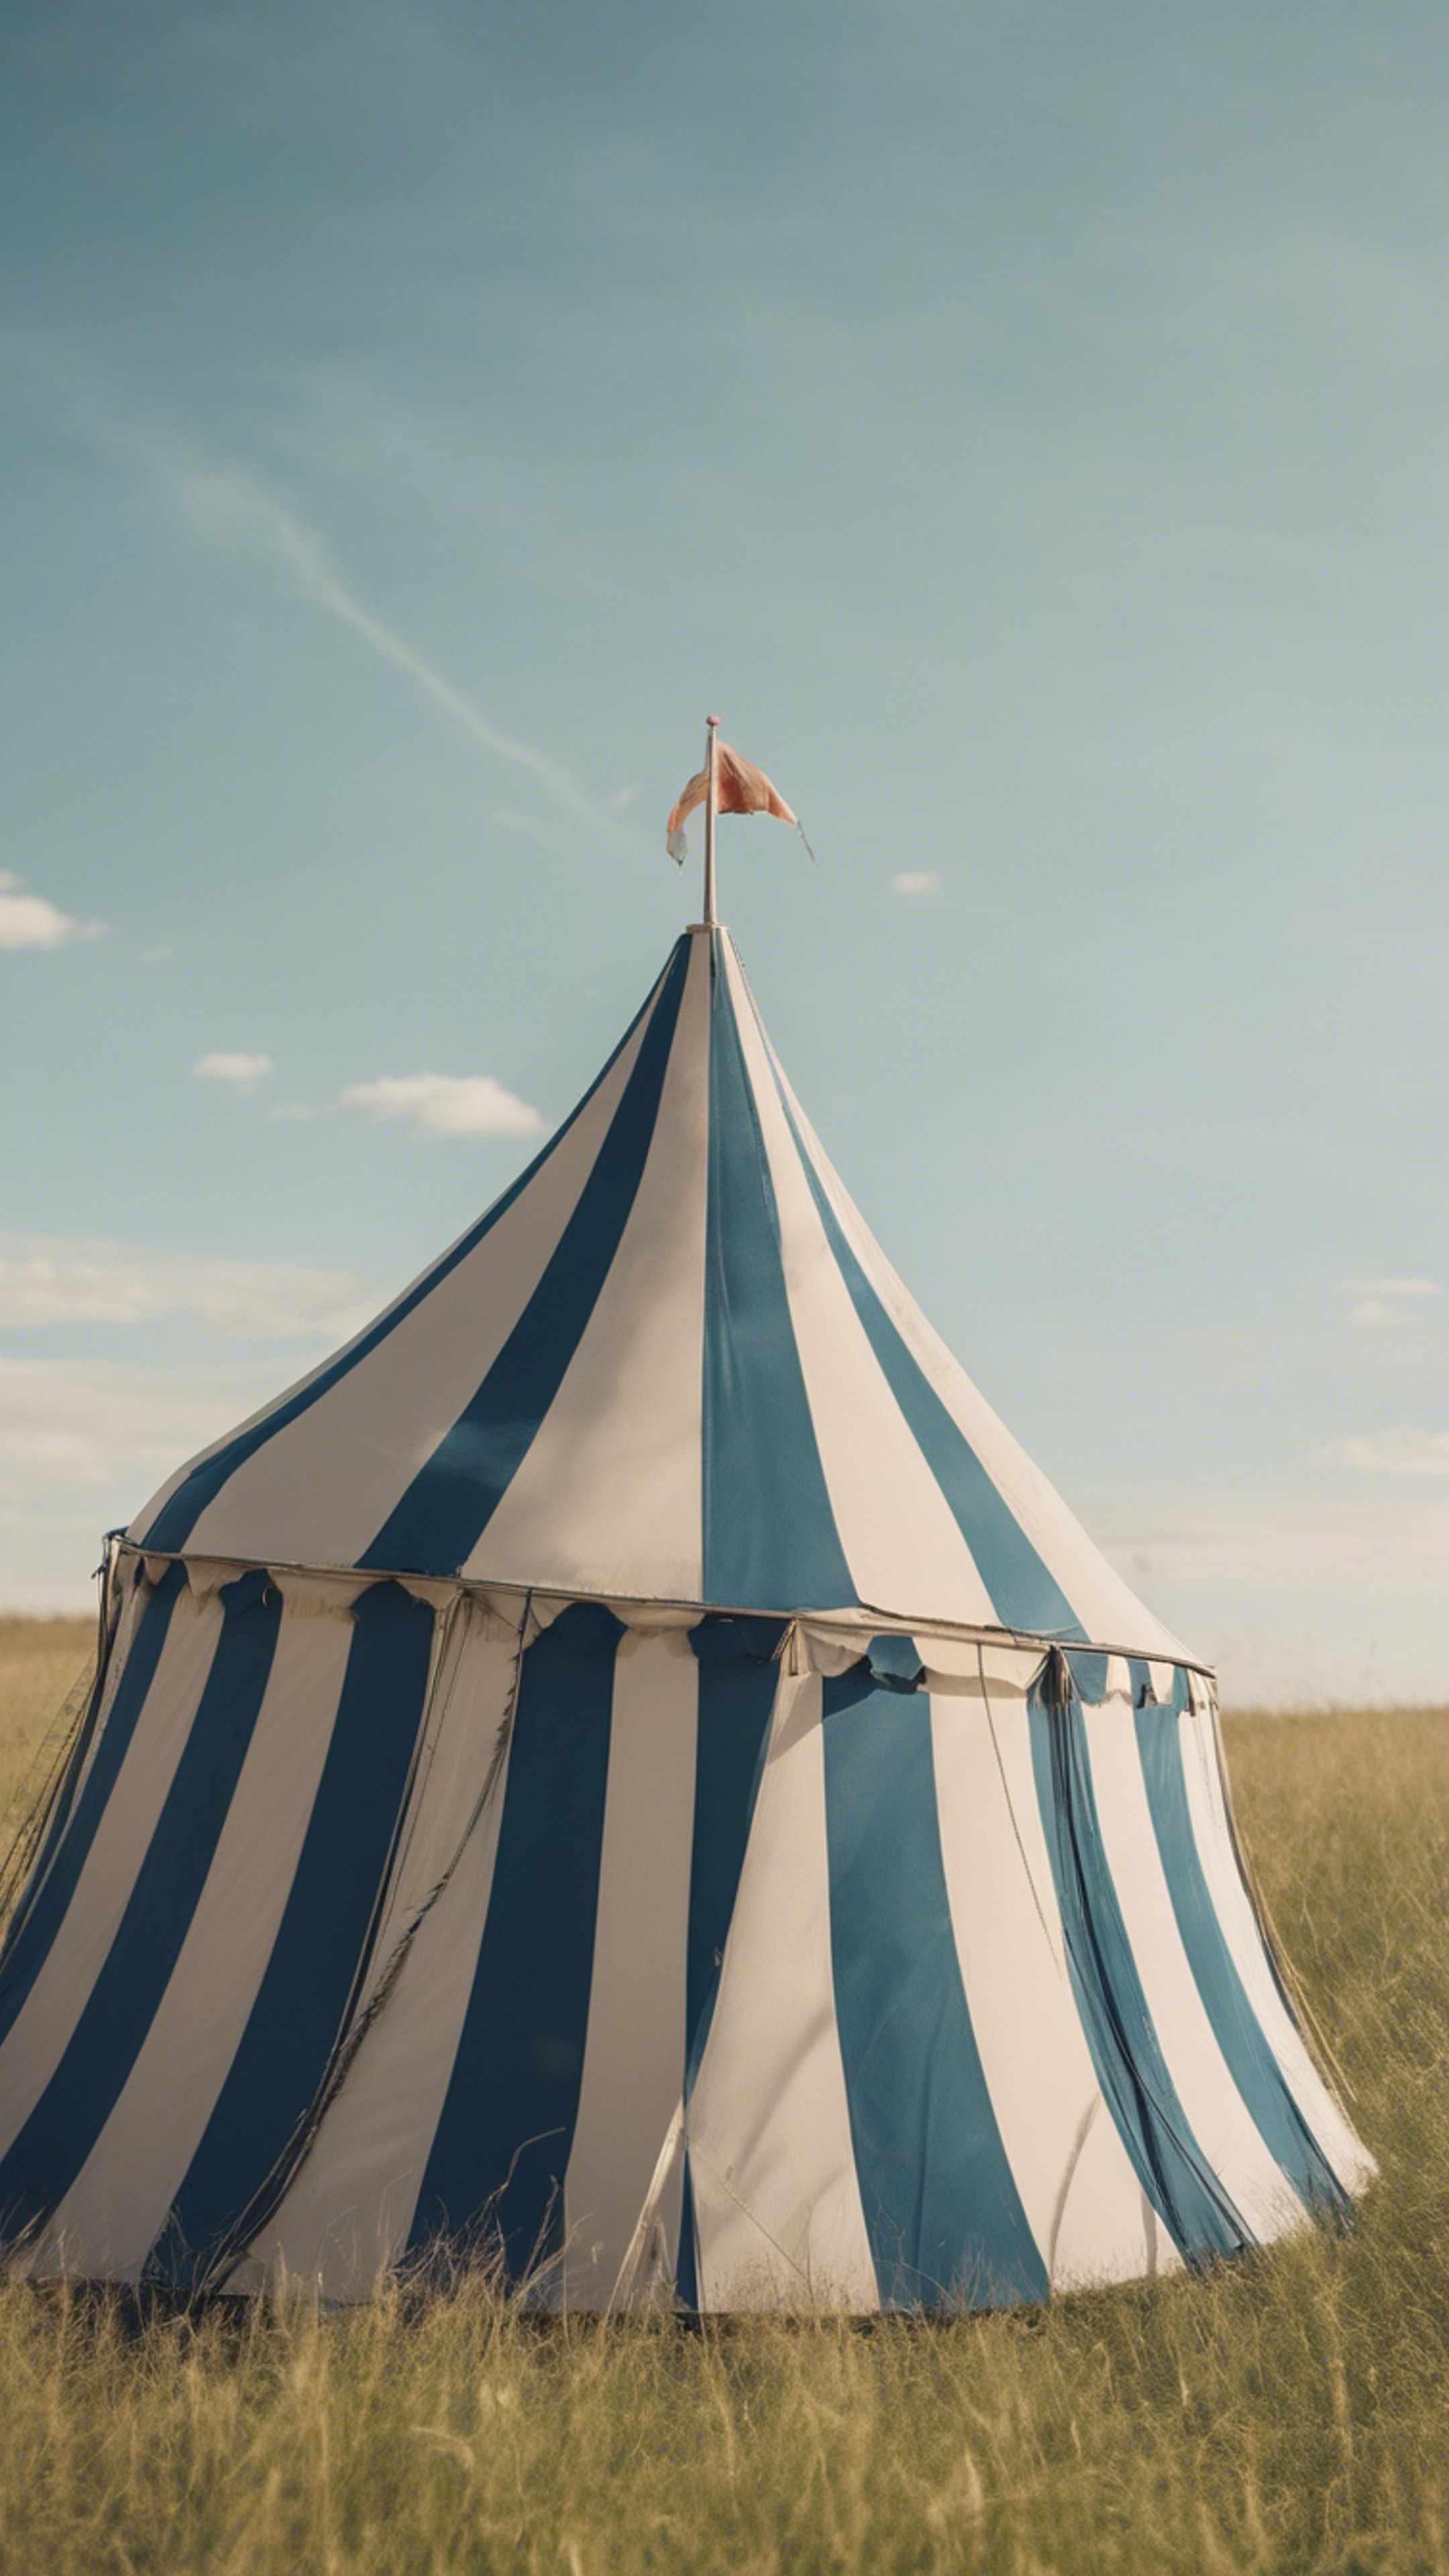 A vintage striped circus tent in a grassy field with a blue sky overhead. Шпалери[07d58b74cbfe41aa8350]